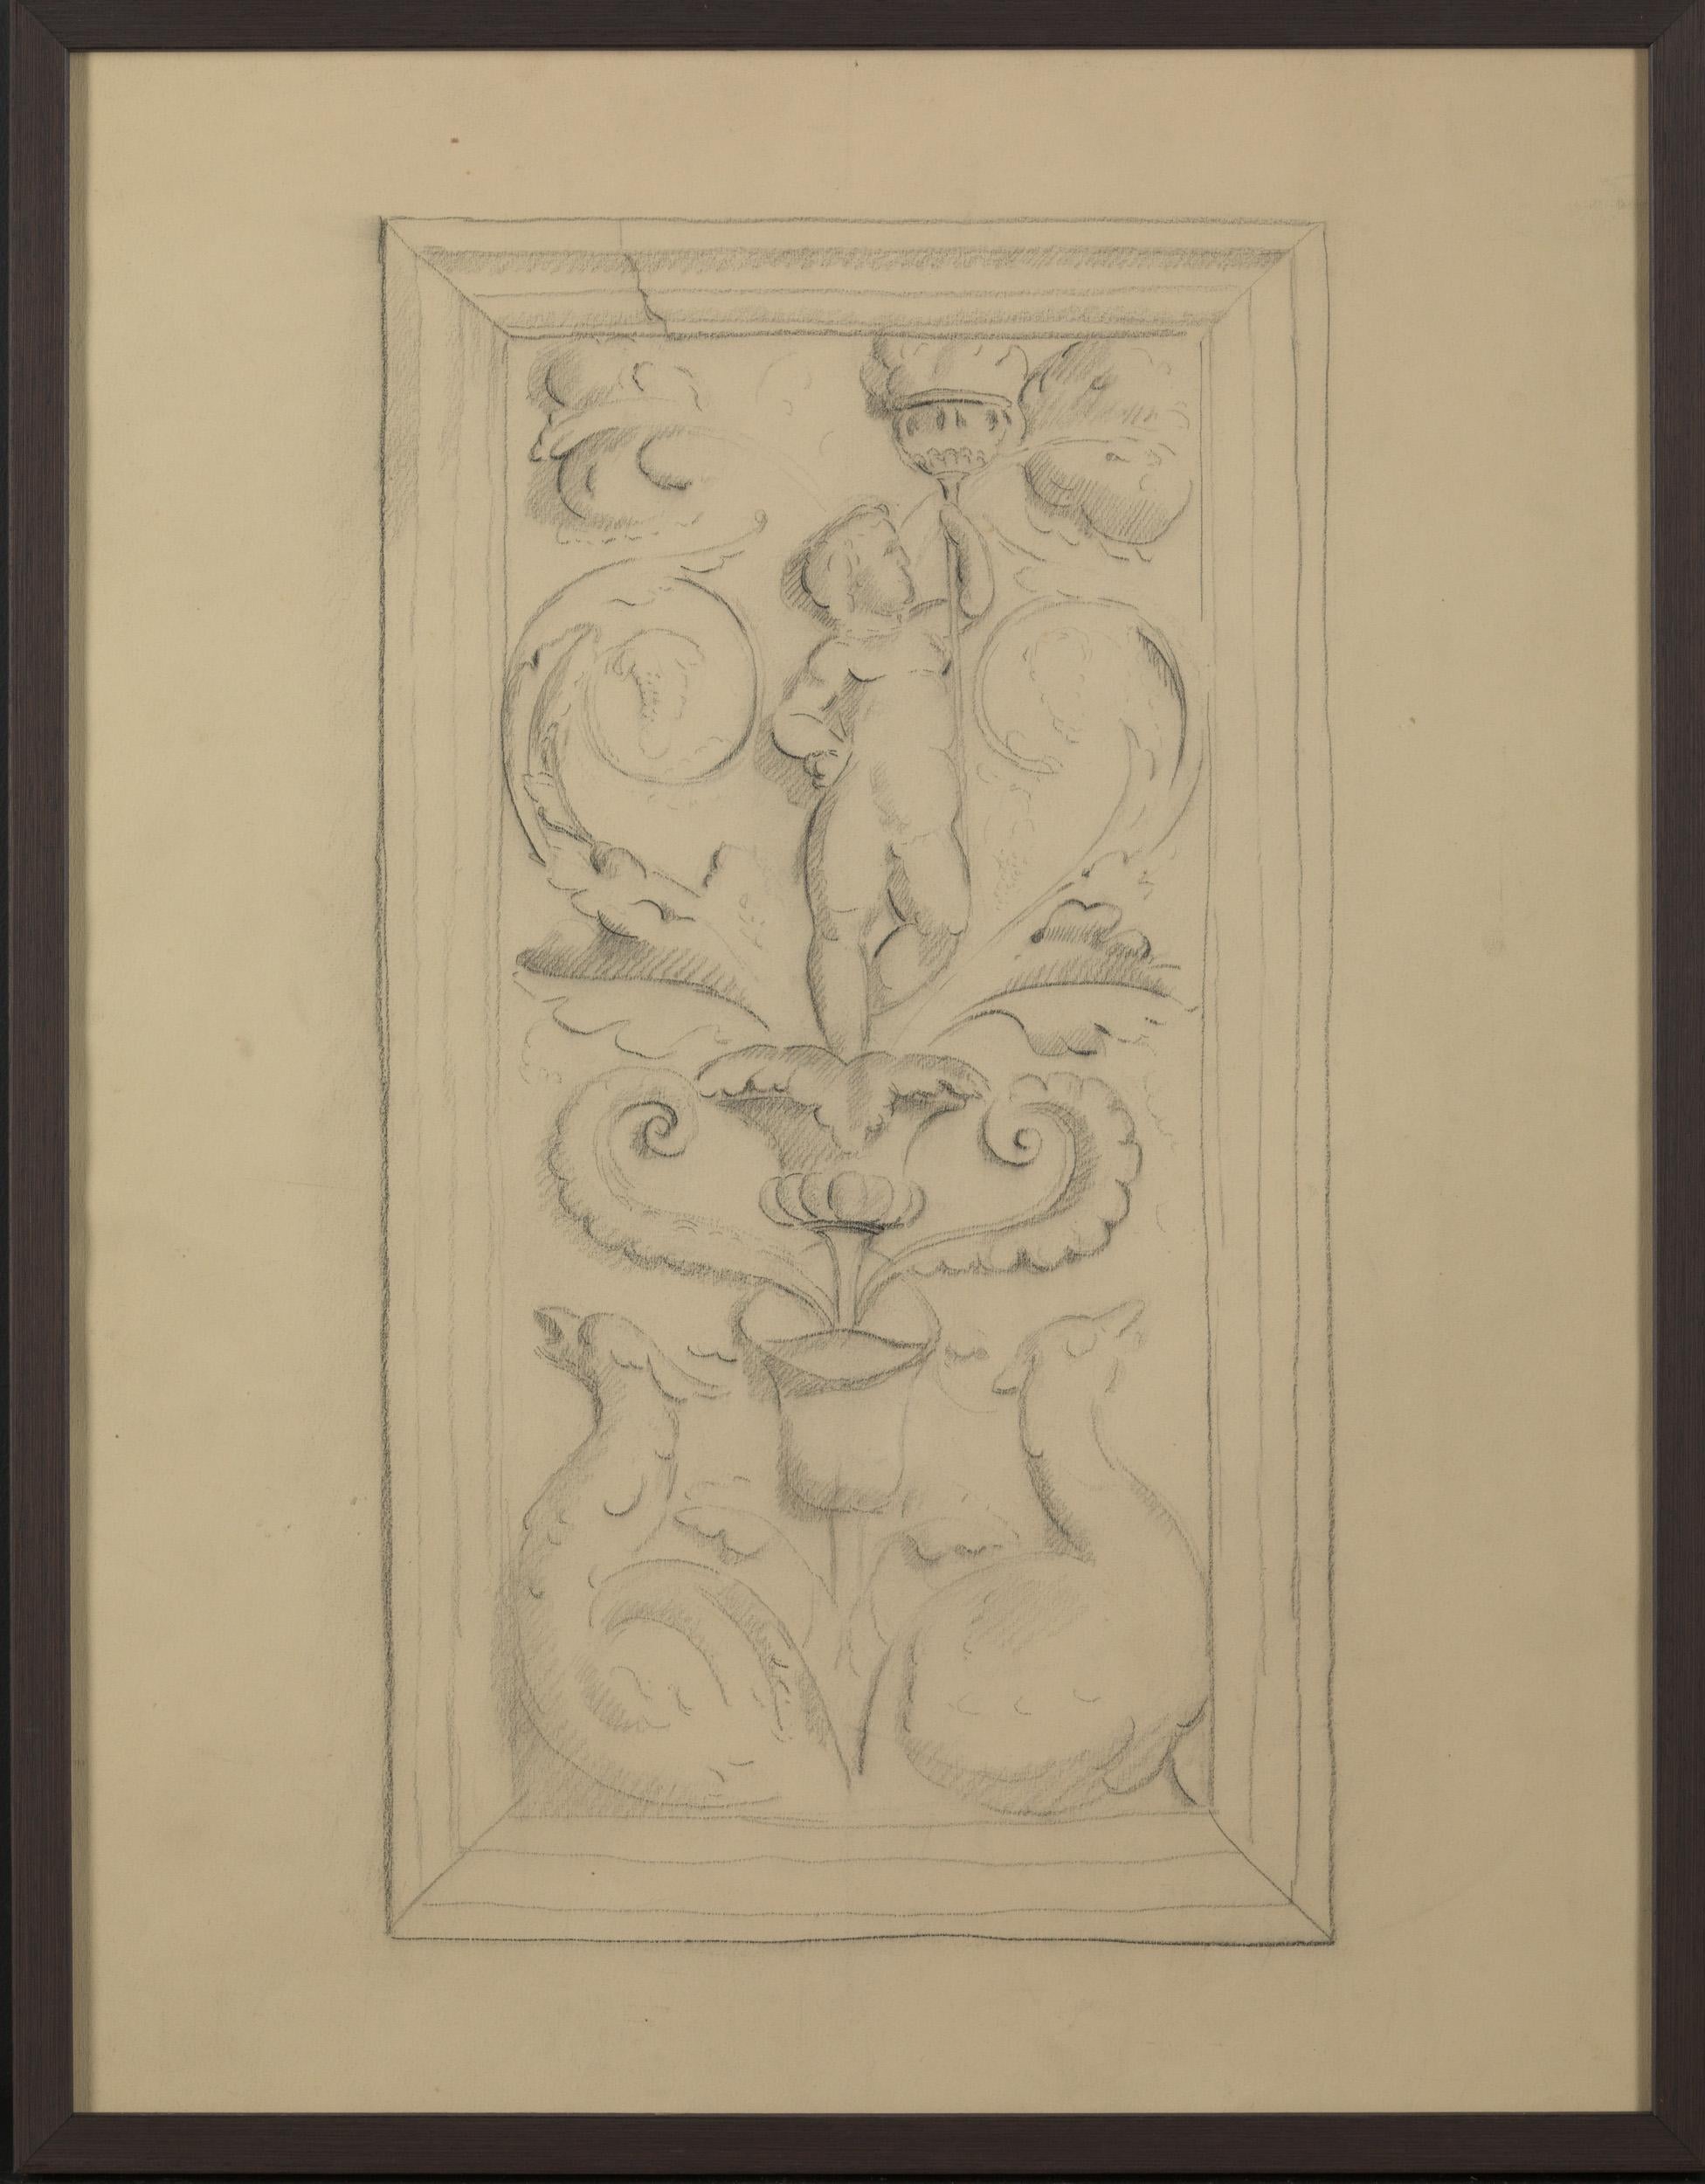 Unknown Academy Student 19th C Drawing, pencil on paper, framed, signed and dated.